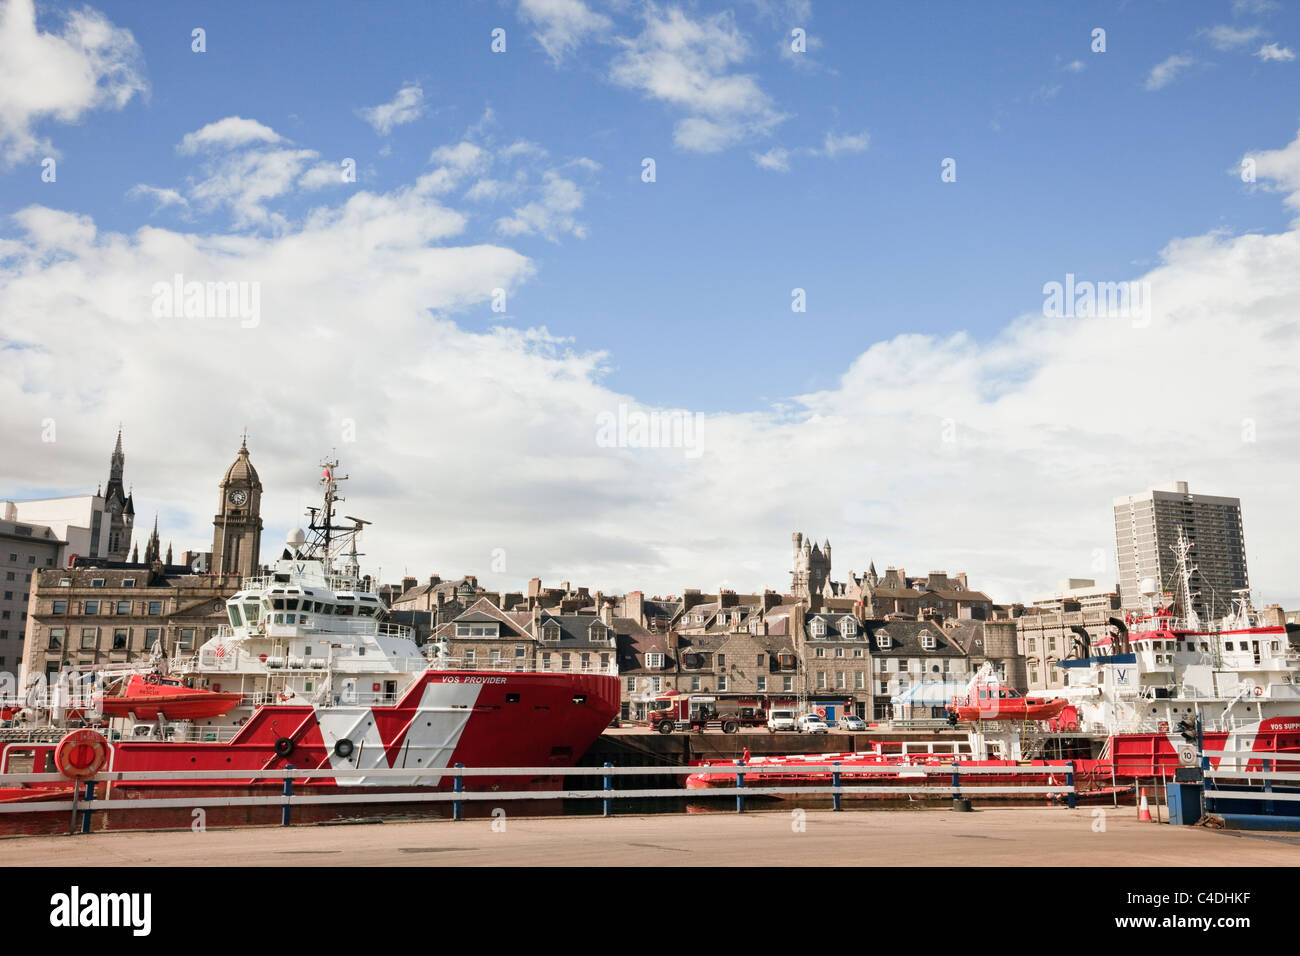 Aberdeen, Aberdeenshire, Scotland, UK, Europe. City centre skyline and waterfront from port with ships in dock Stock Photo